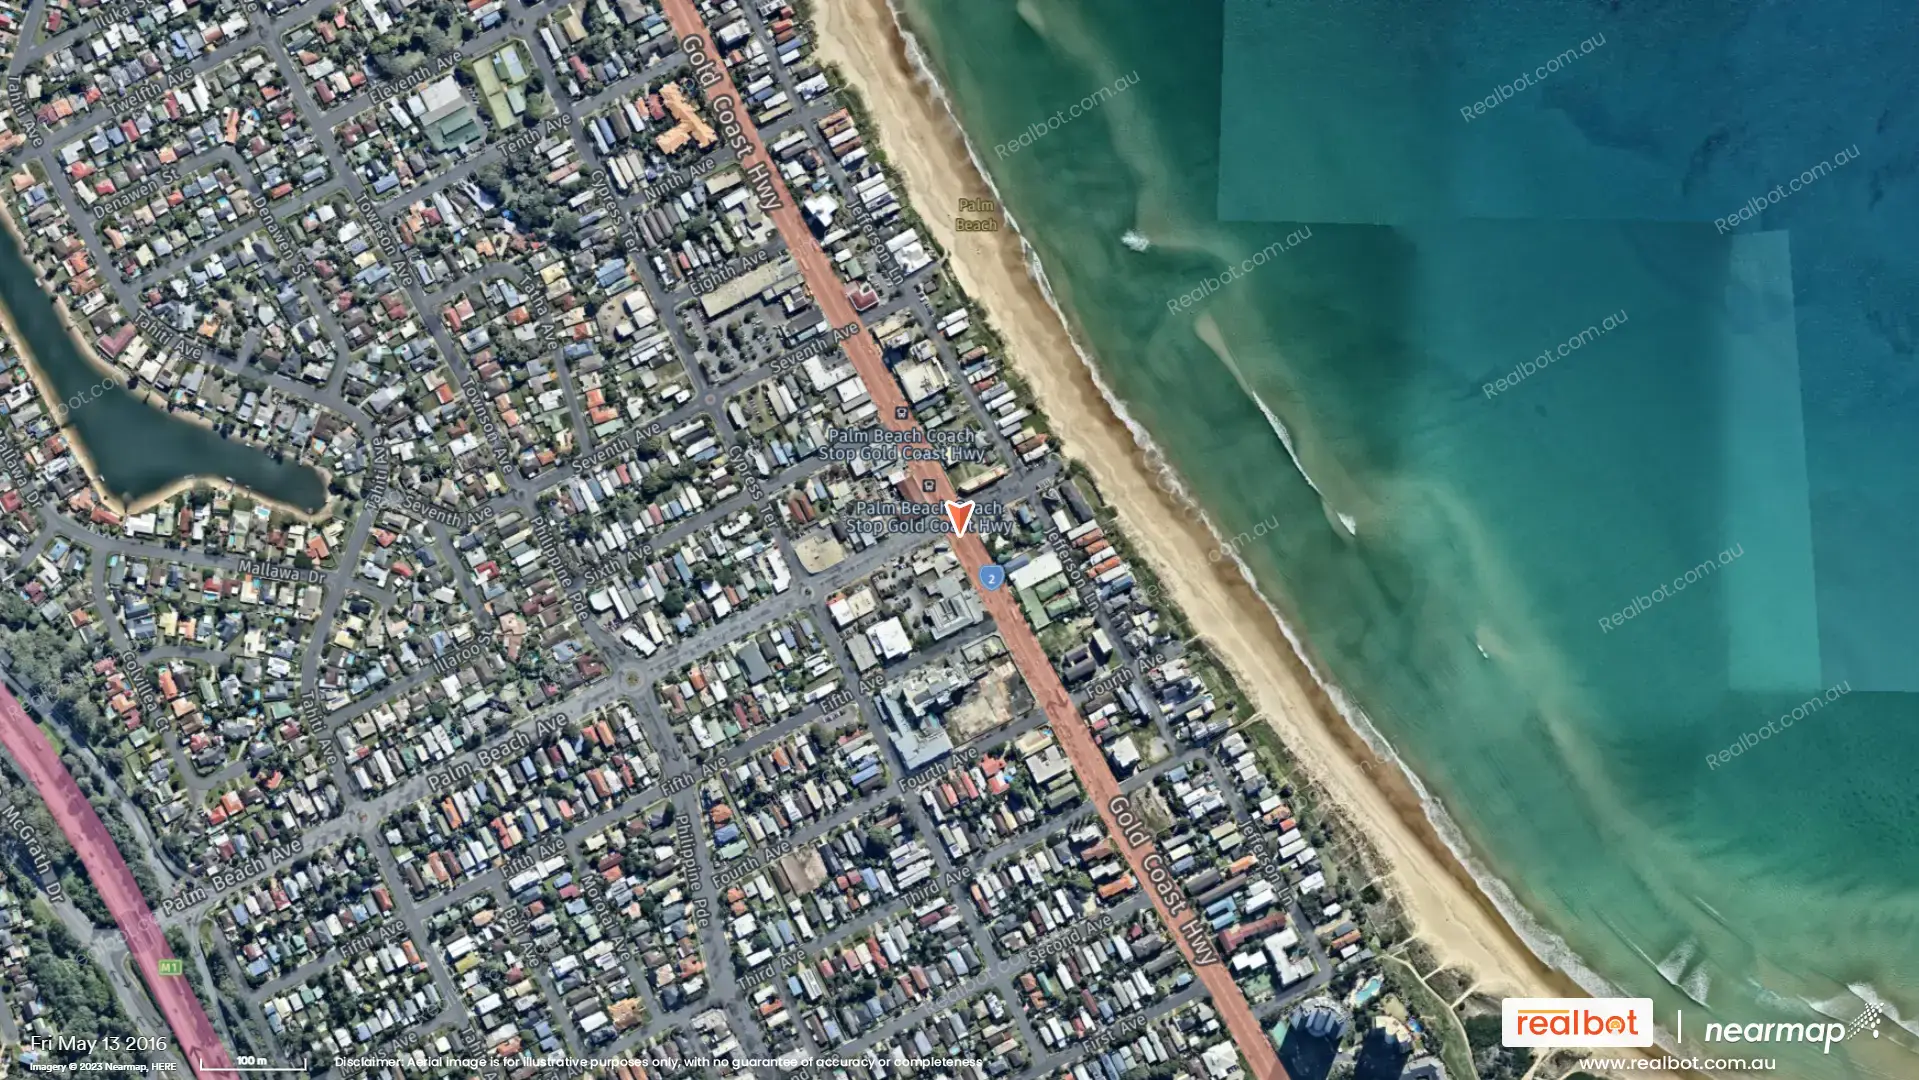 palm-beach-qld-4221-Suburb-Profile-And-Aerial-Images-Real-Search